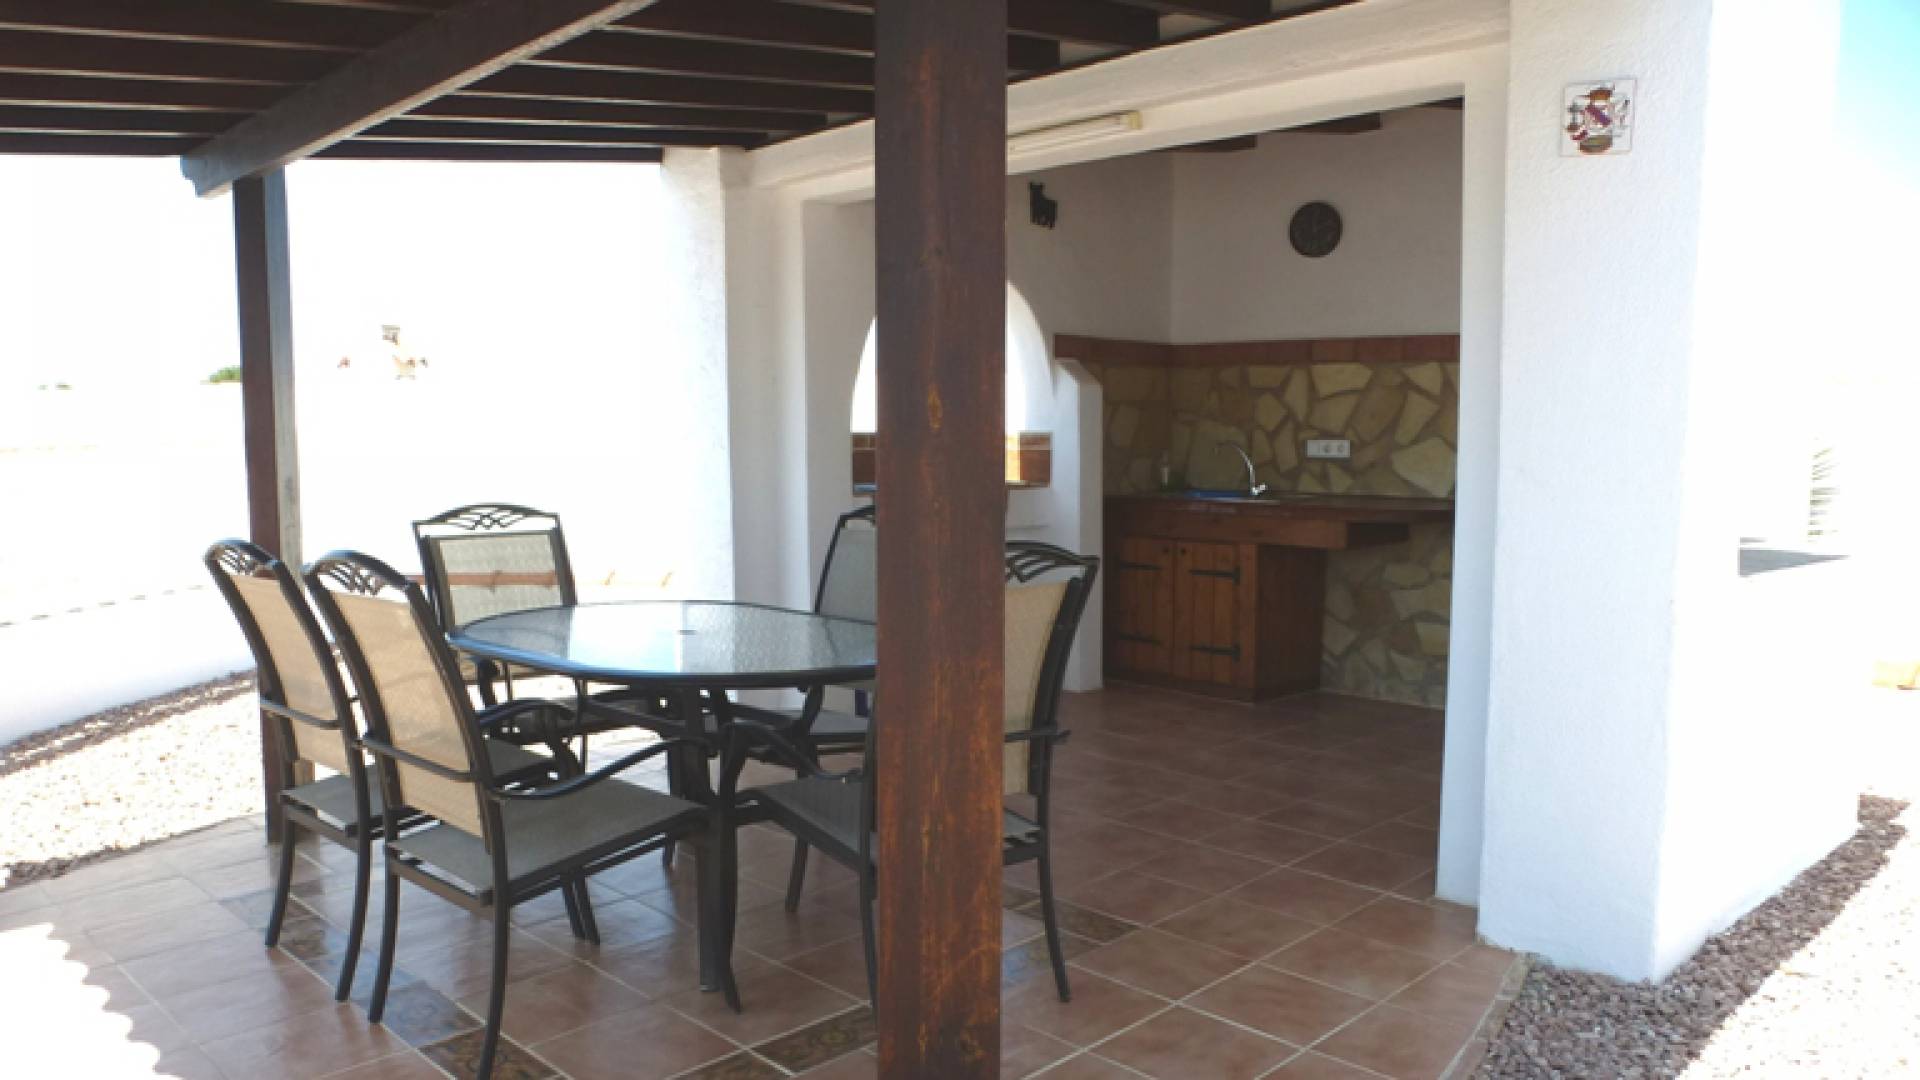 Revente - Country Property - Rafal - rafal   country